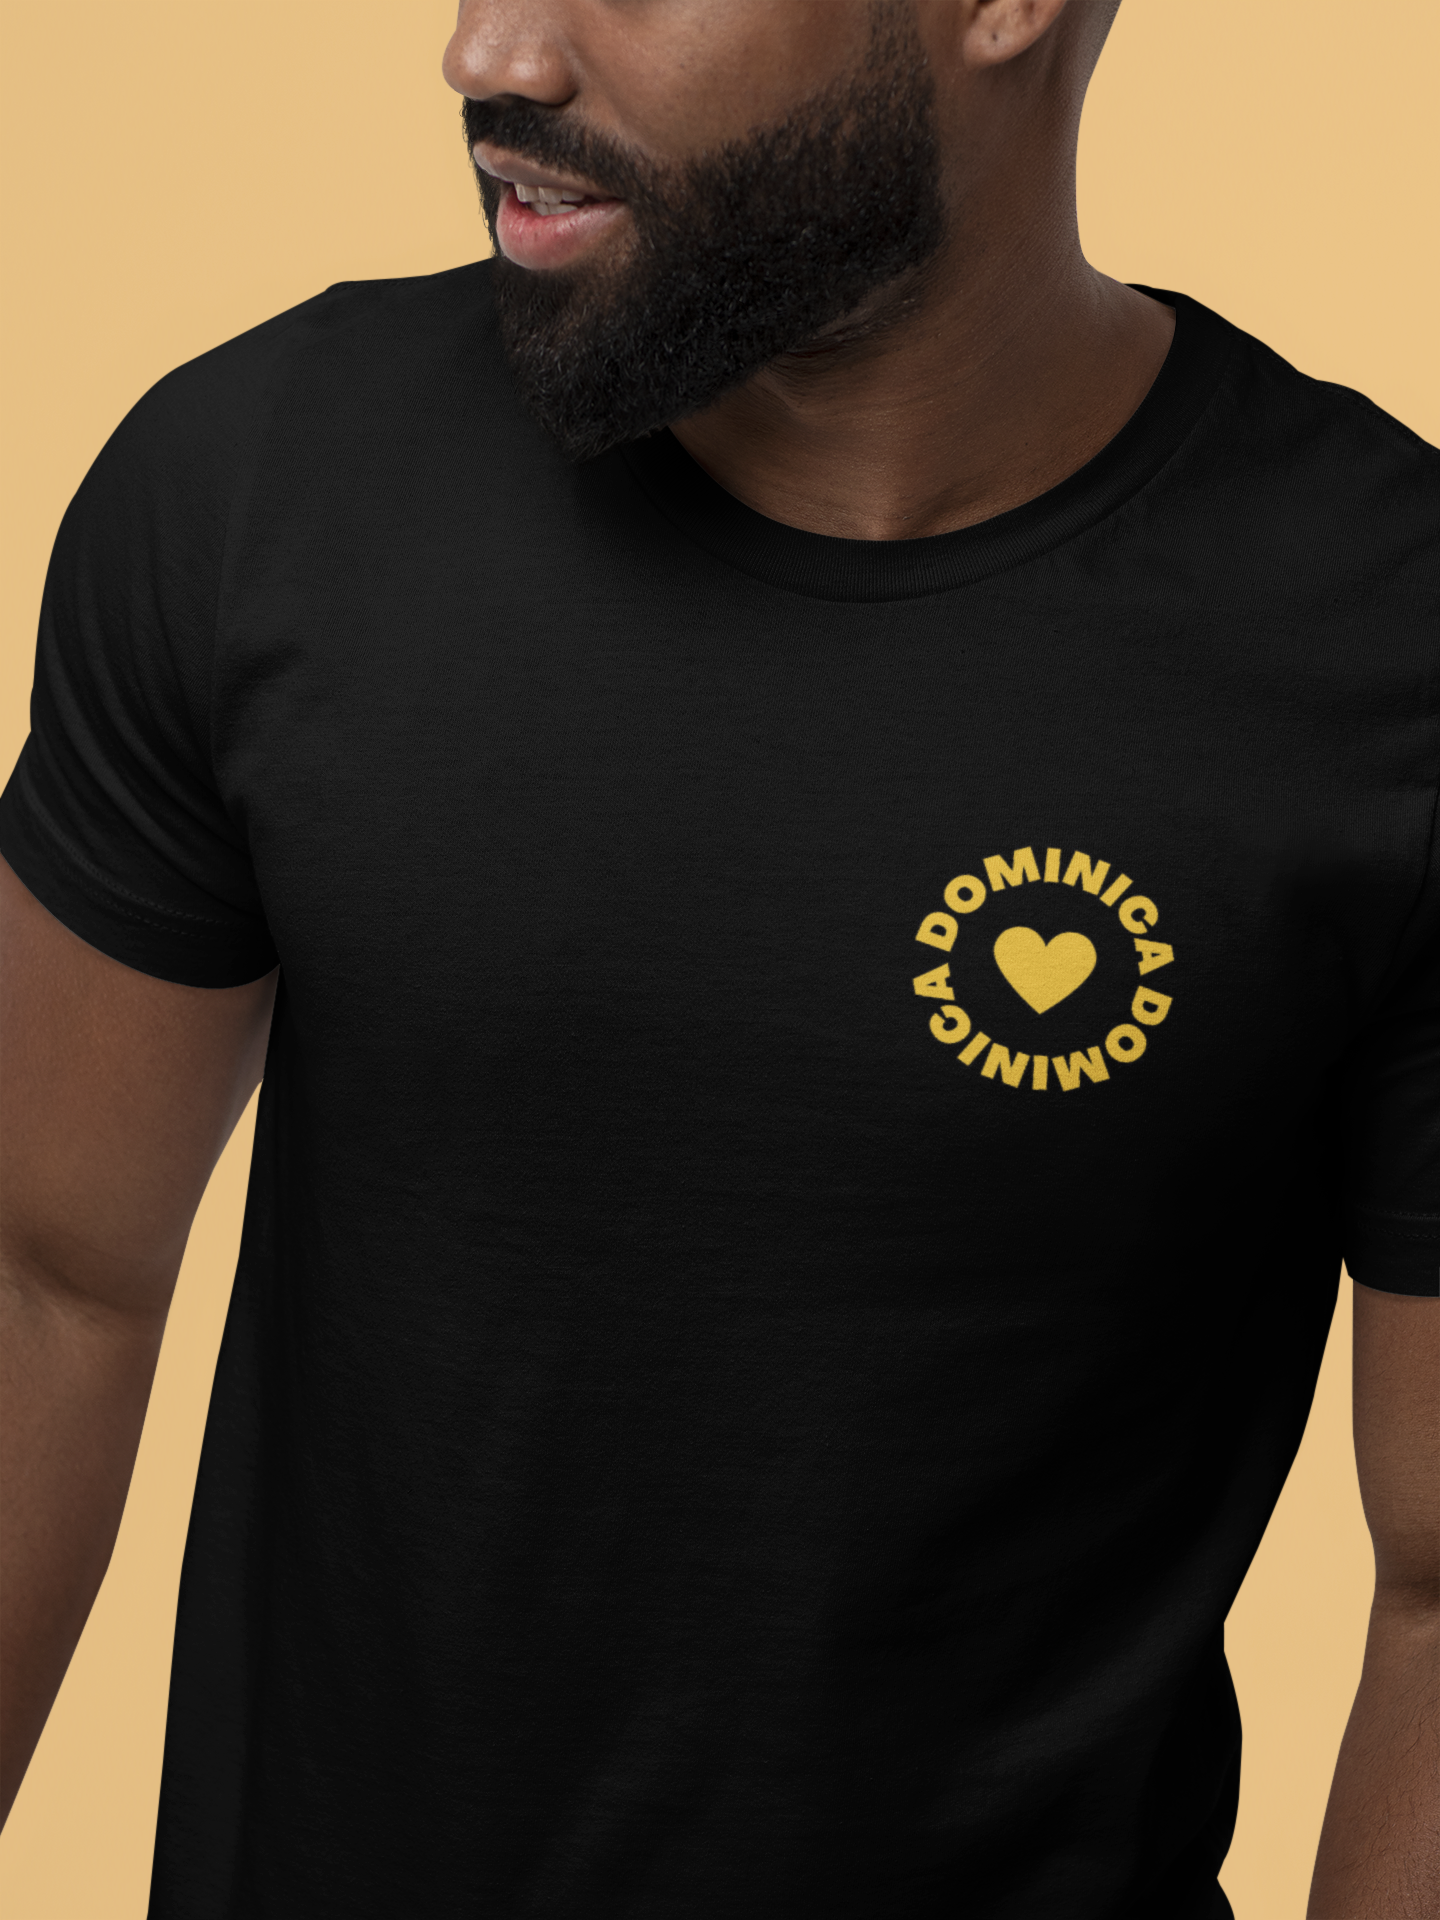 Adult Caribbean Vibes T-shirt - Dominica